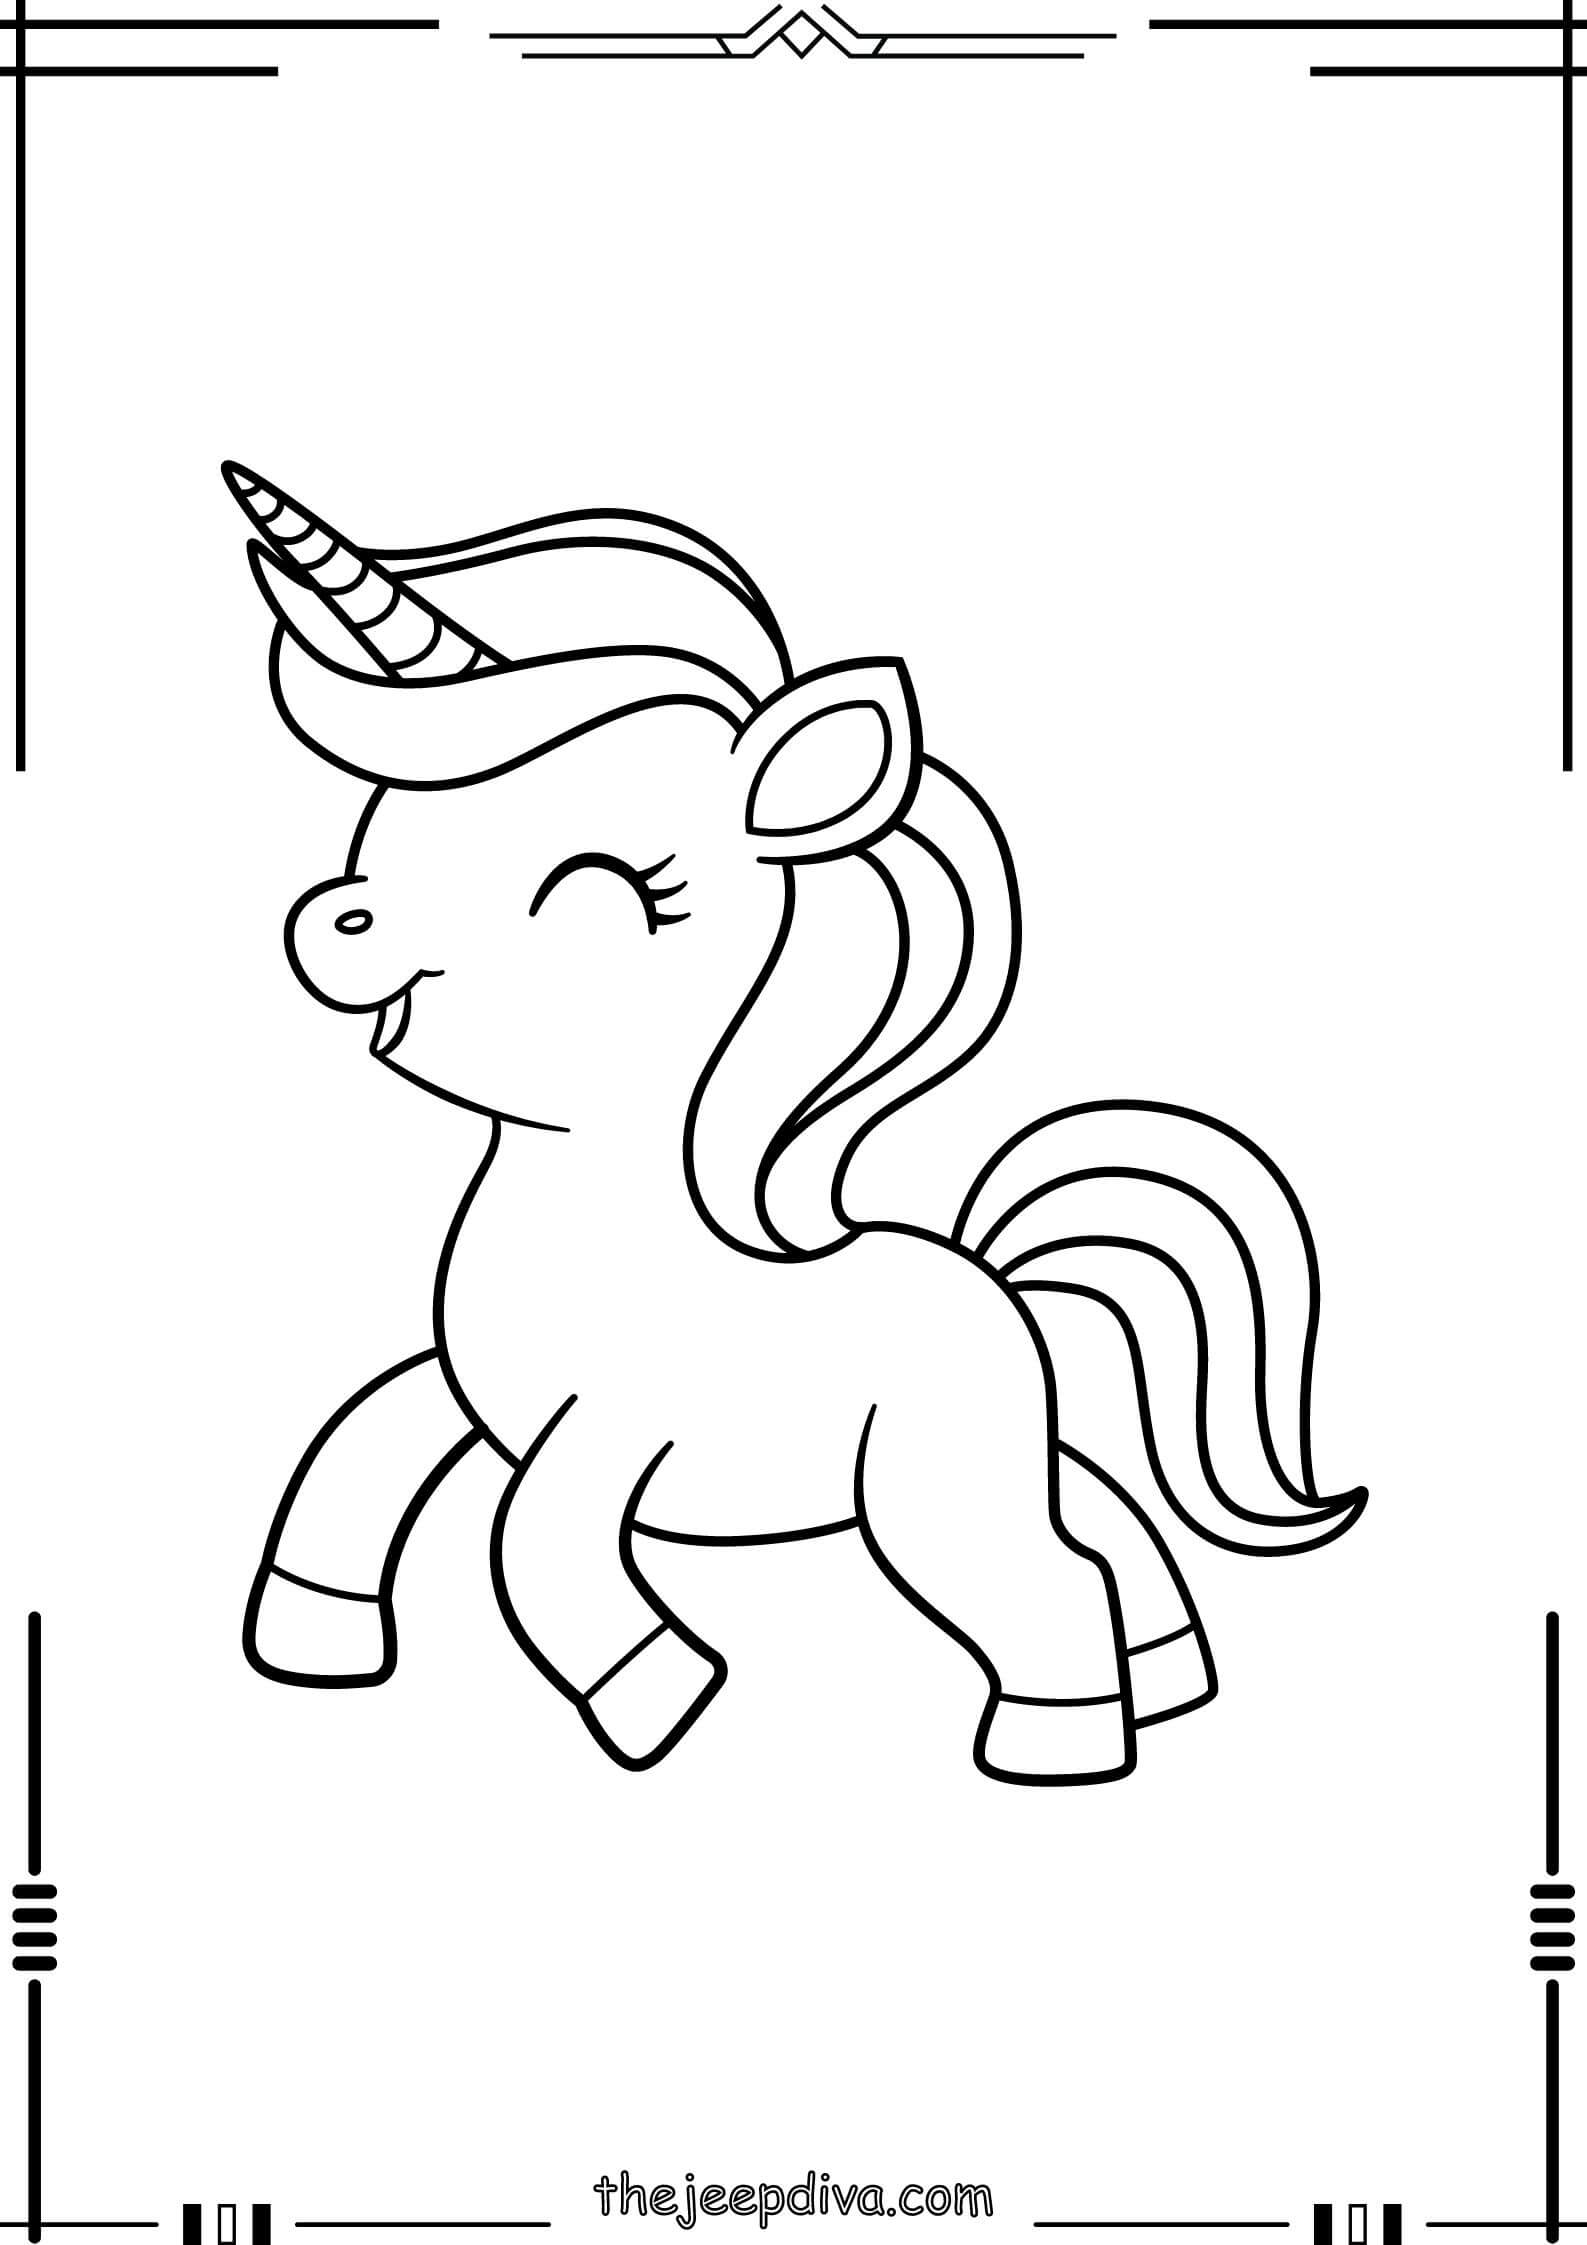 unicorn-coloring-page-easy-3